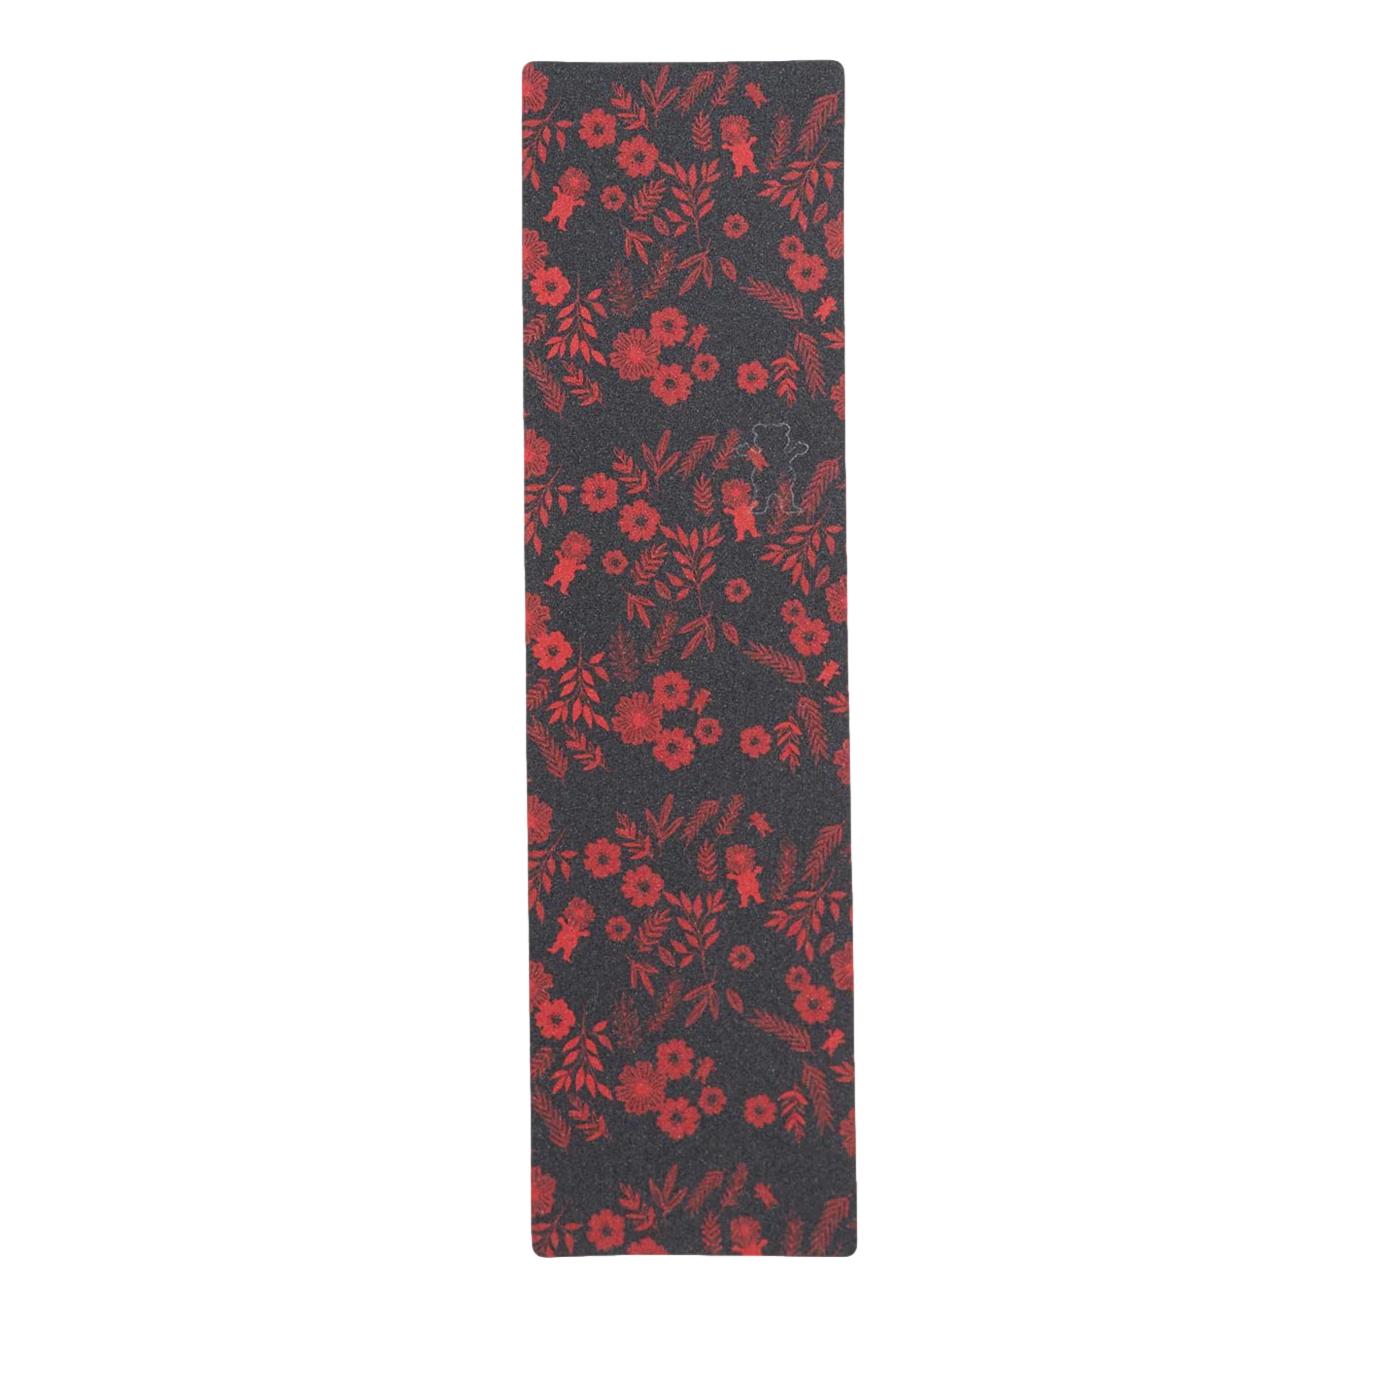 Grizzly Smell The Flowers Black/Red - Venue Skateboards